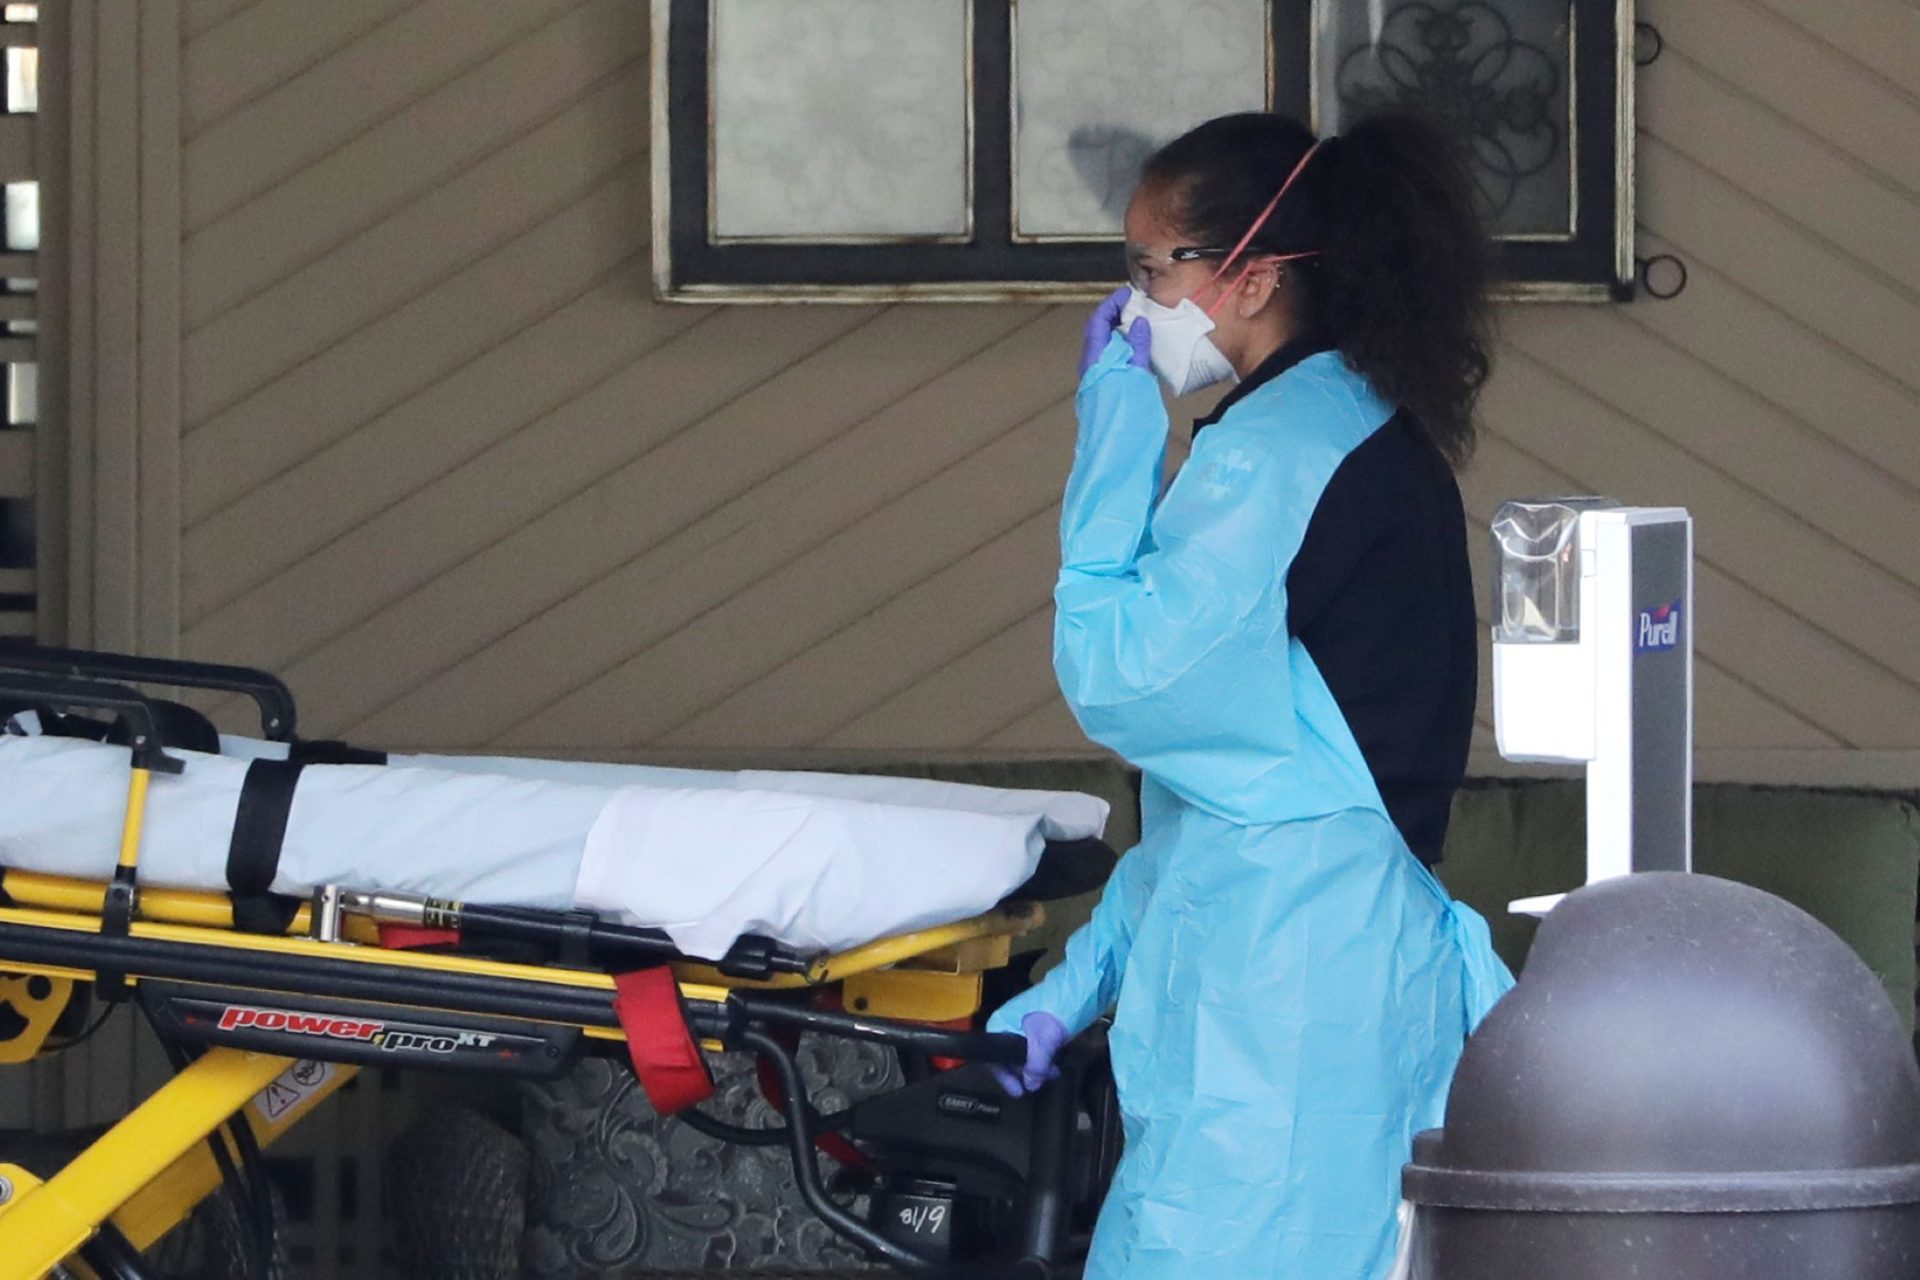 An ambulance worker adjusts her protective mask as she wheels a stretcher into a nursing facility where more than 50 people are sick and being tested for the COVID-19 virus, Saturday, Feb. 29, 2020, in Kirkland, Wash. Health officials reported two cases of COVID-19 virus connected to the Life Care Center of Kirkland. One is a Life Care worker, a woman in her 40s who is in satisfactory condition at a hospital, and the other is a woman in her 70s and a resident at Life Care who is hospitalized in serious condition. Neither have traveled out of the country.